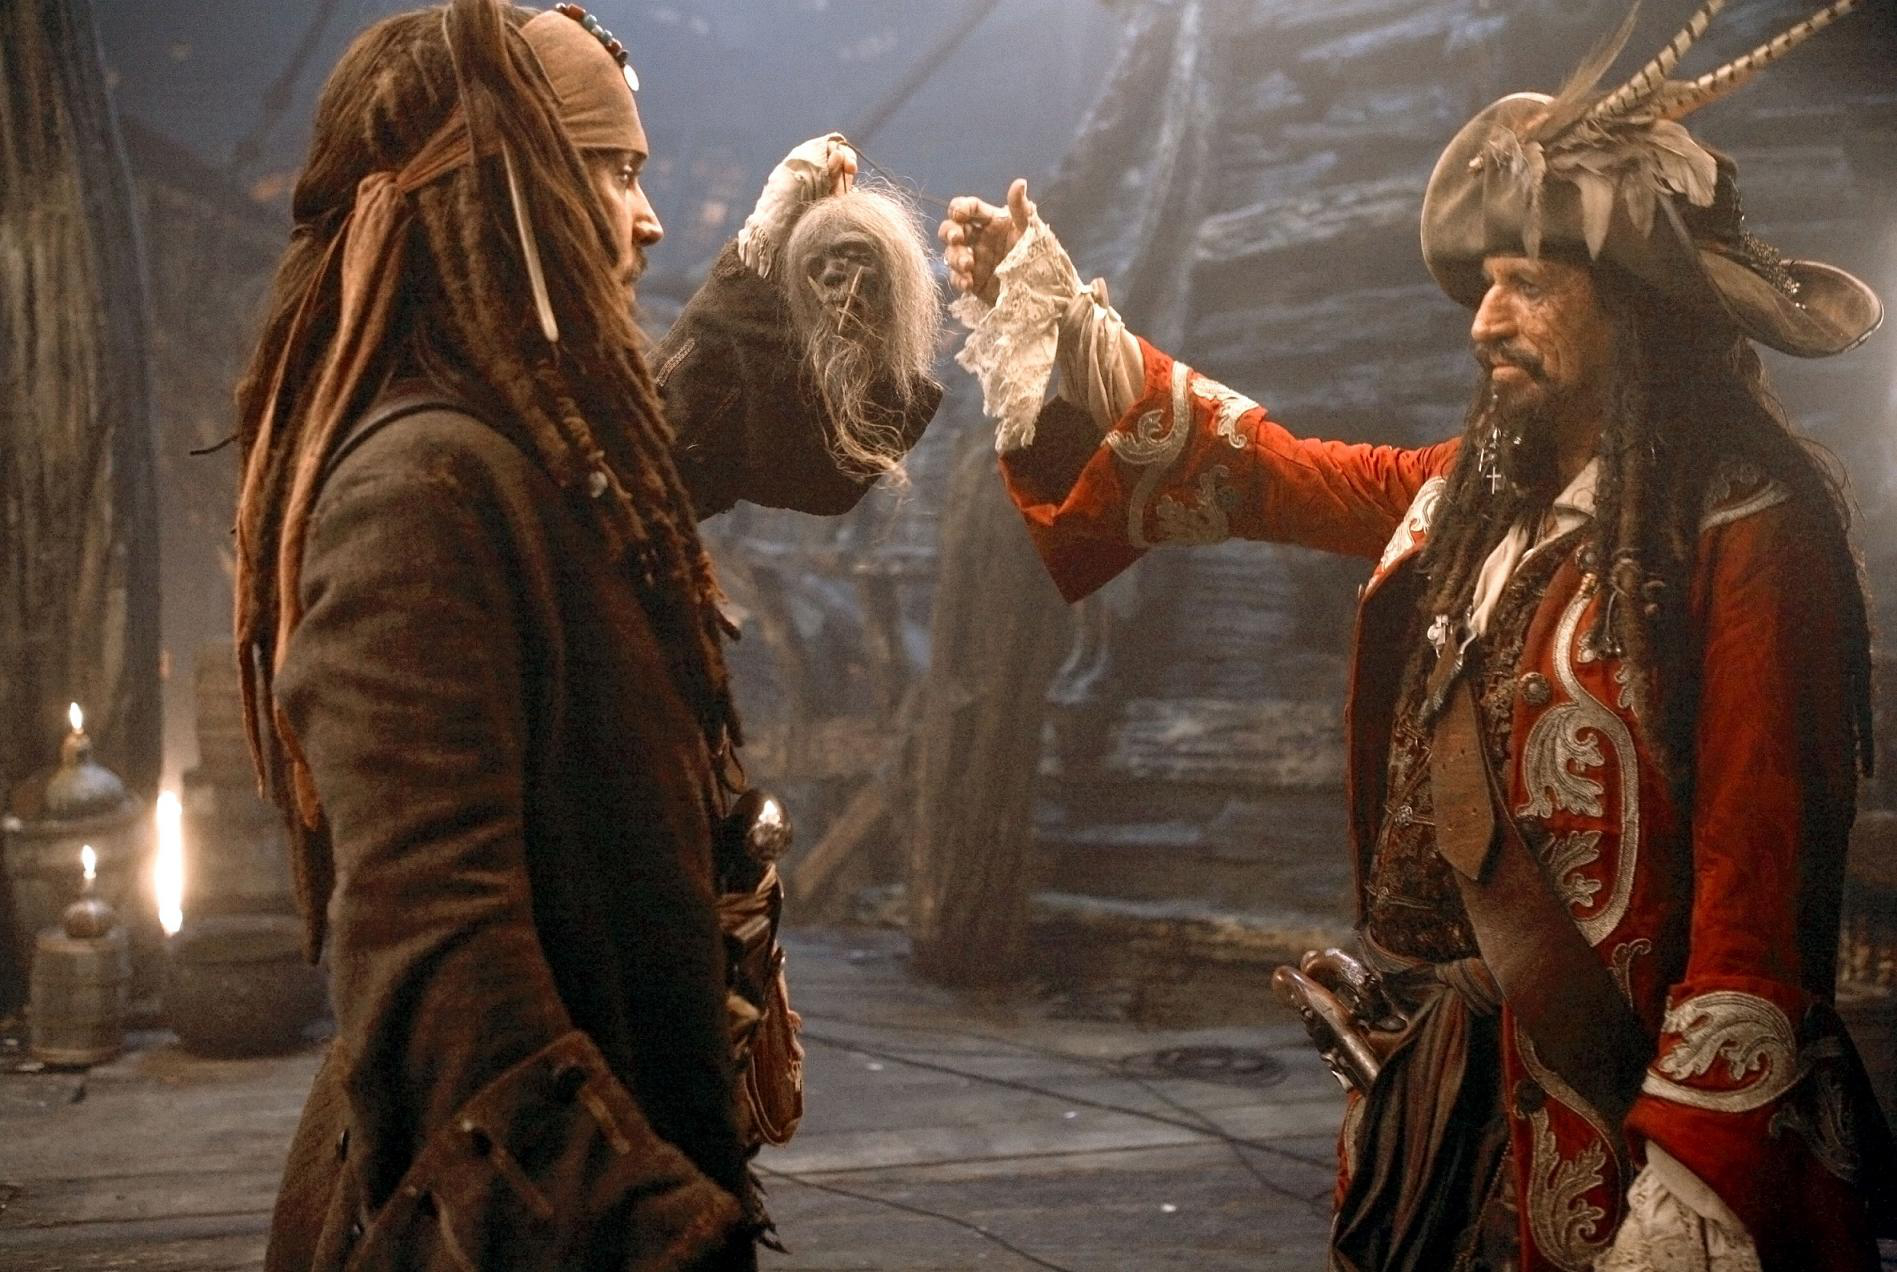 movie, pirates of the caribbean: at world's end, jack sparrow, johnny depp, keith richards, teague sparrow, pirates of the caribbean